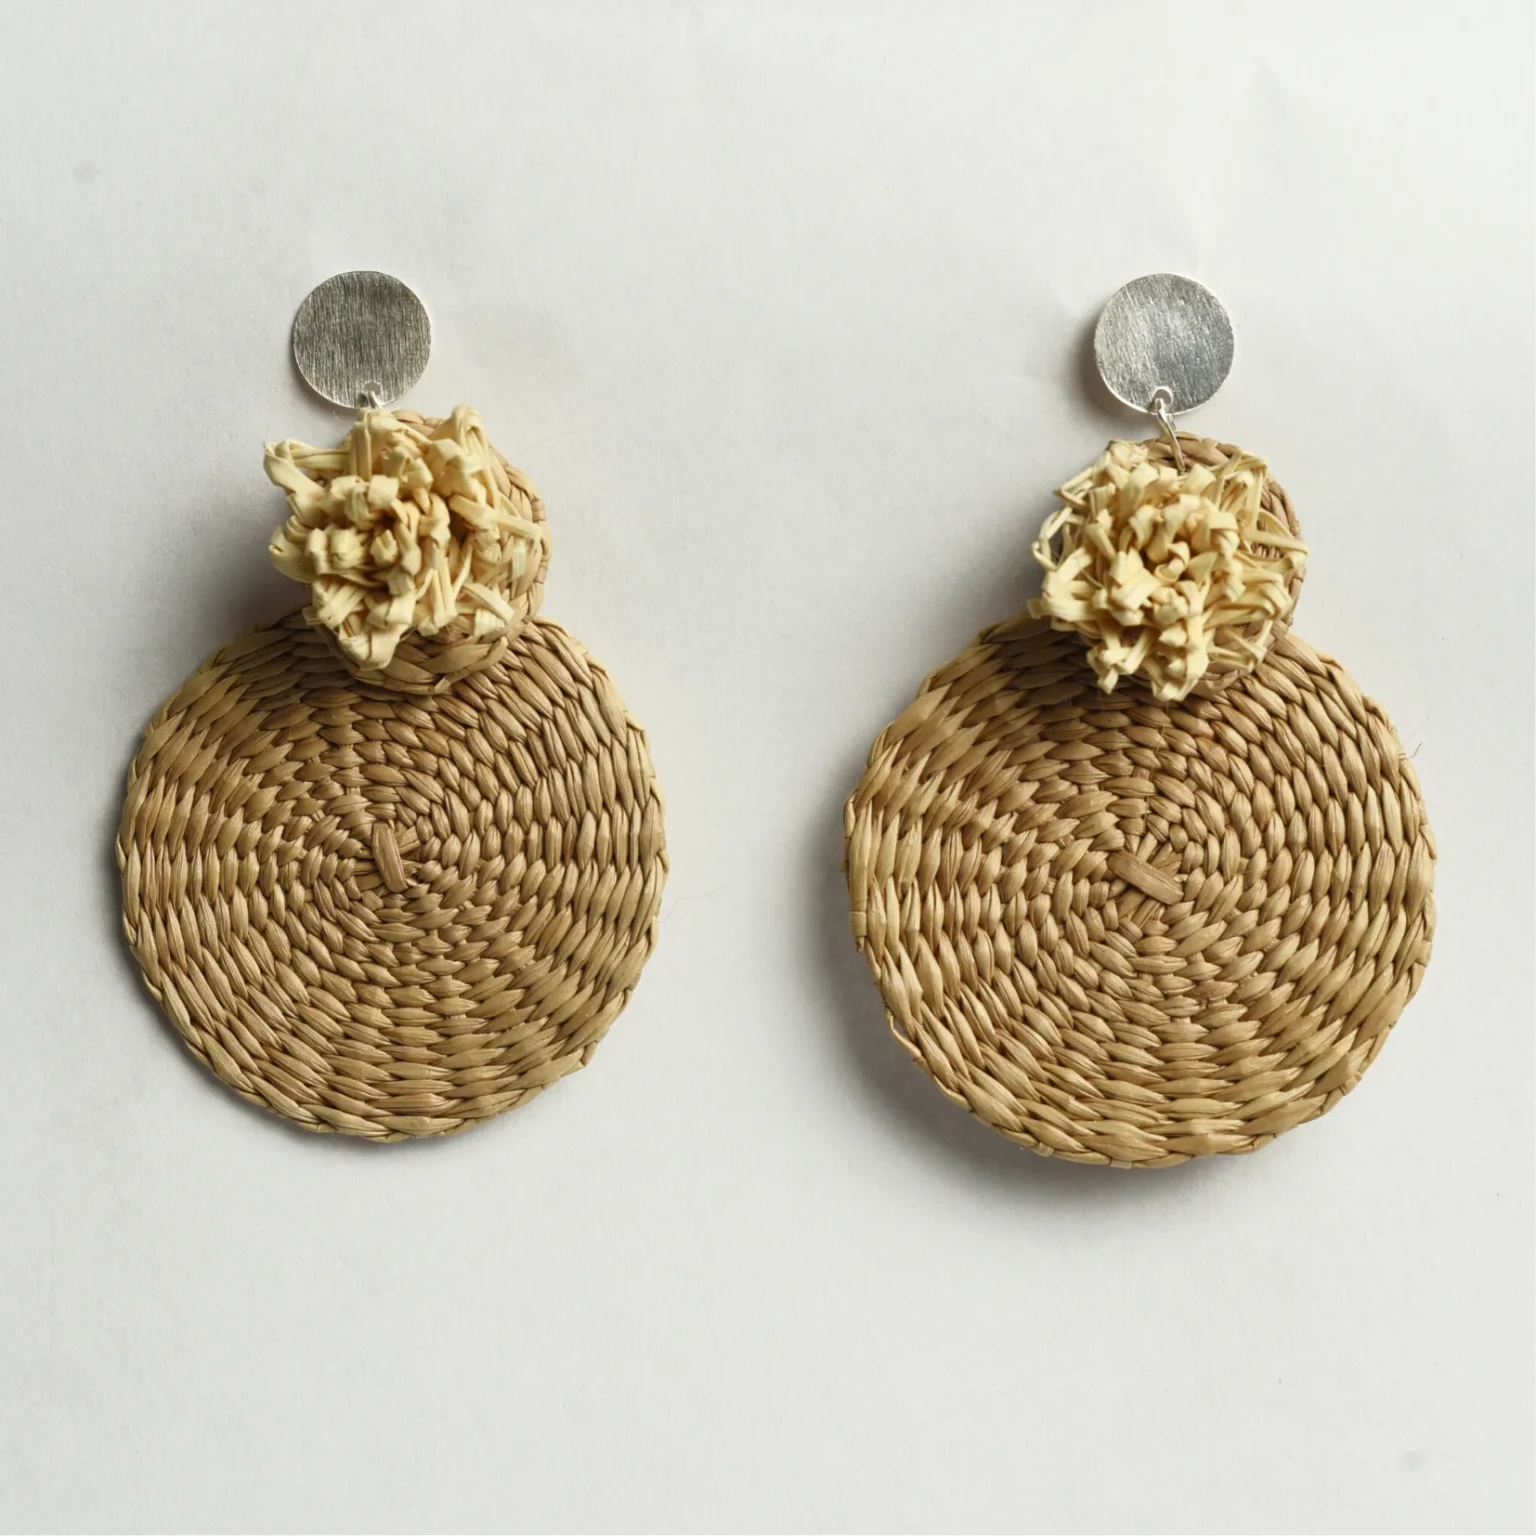 Handcrafted and Ethically Sourced Earrings